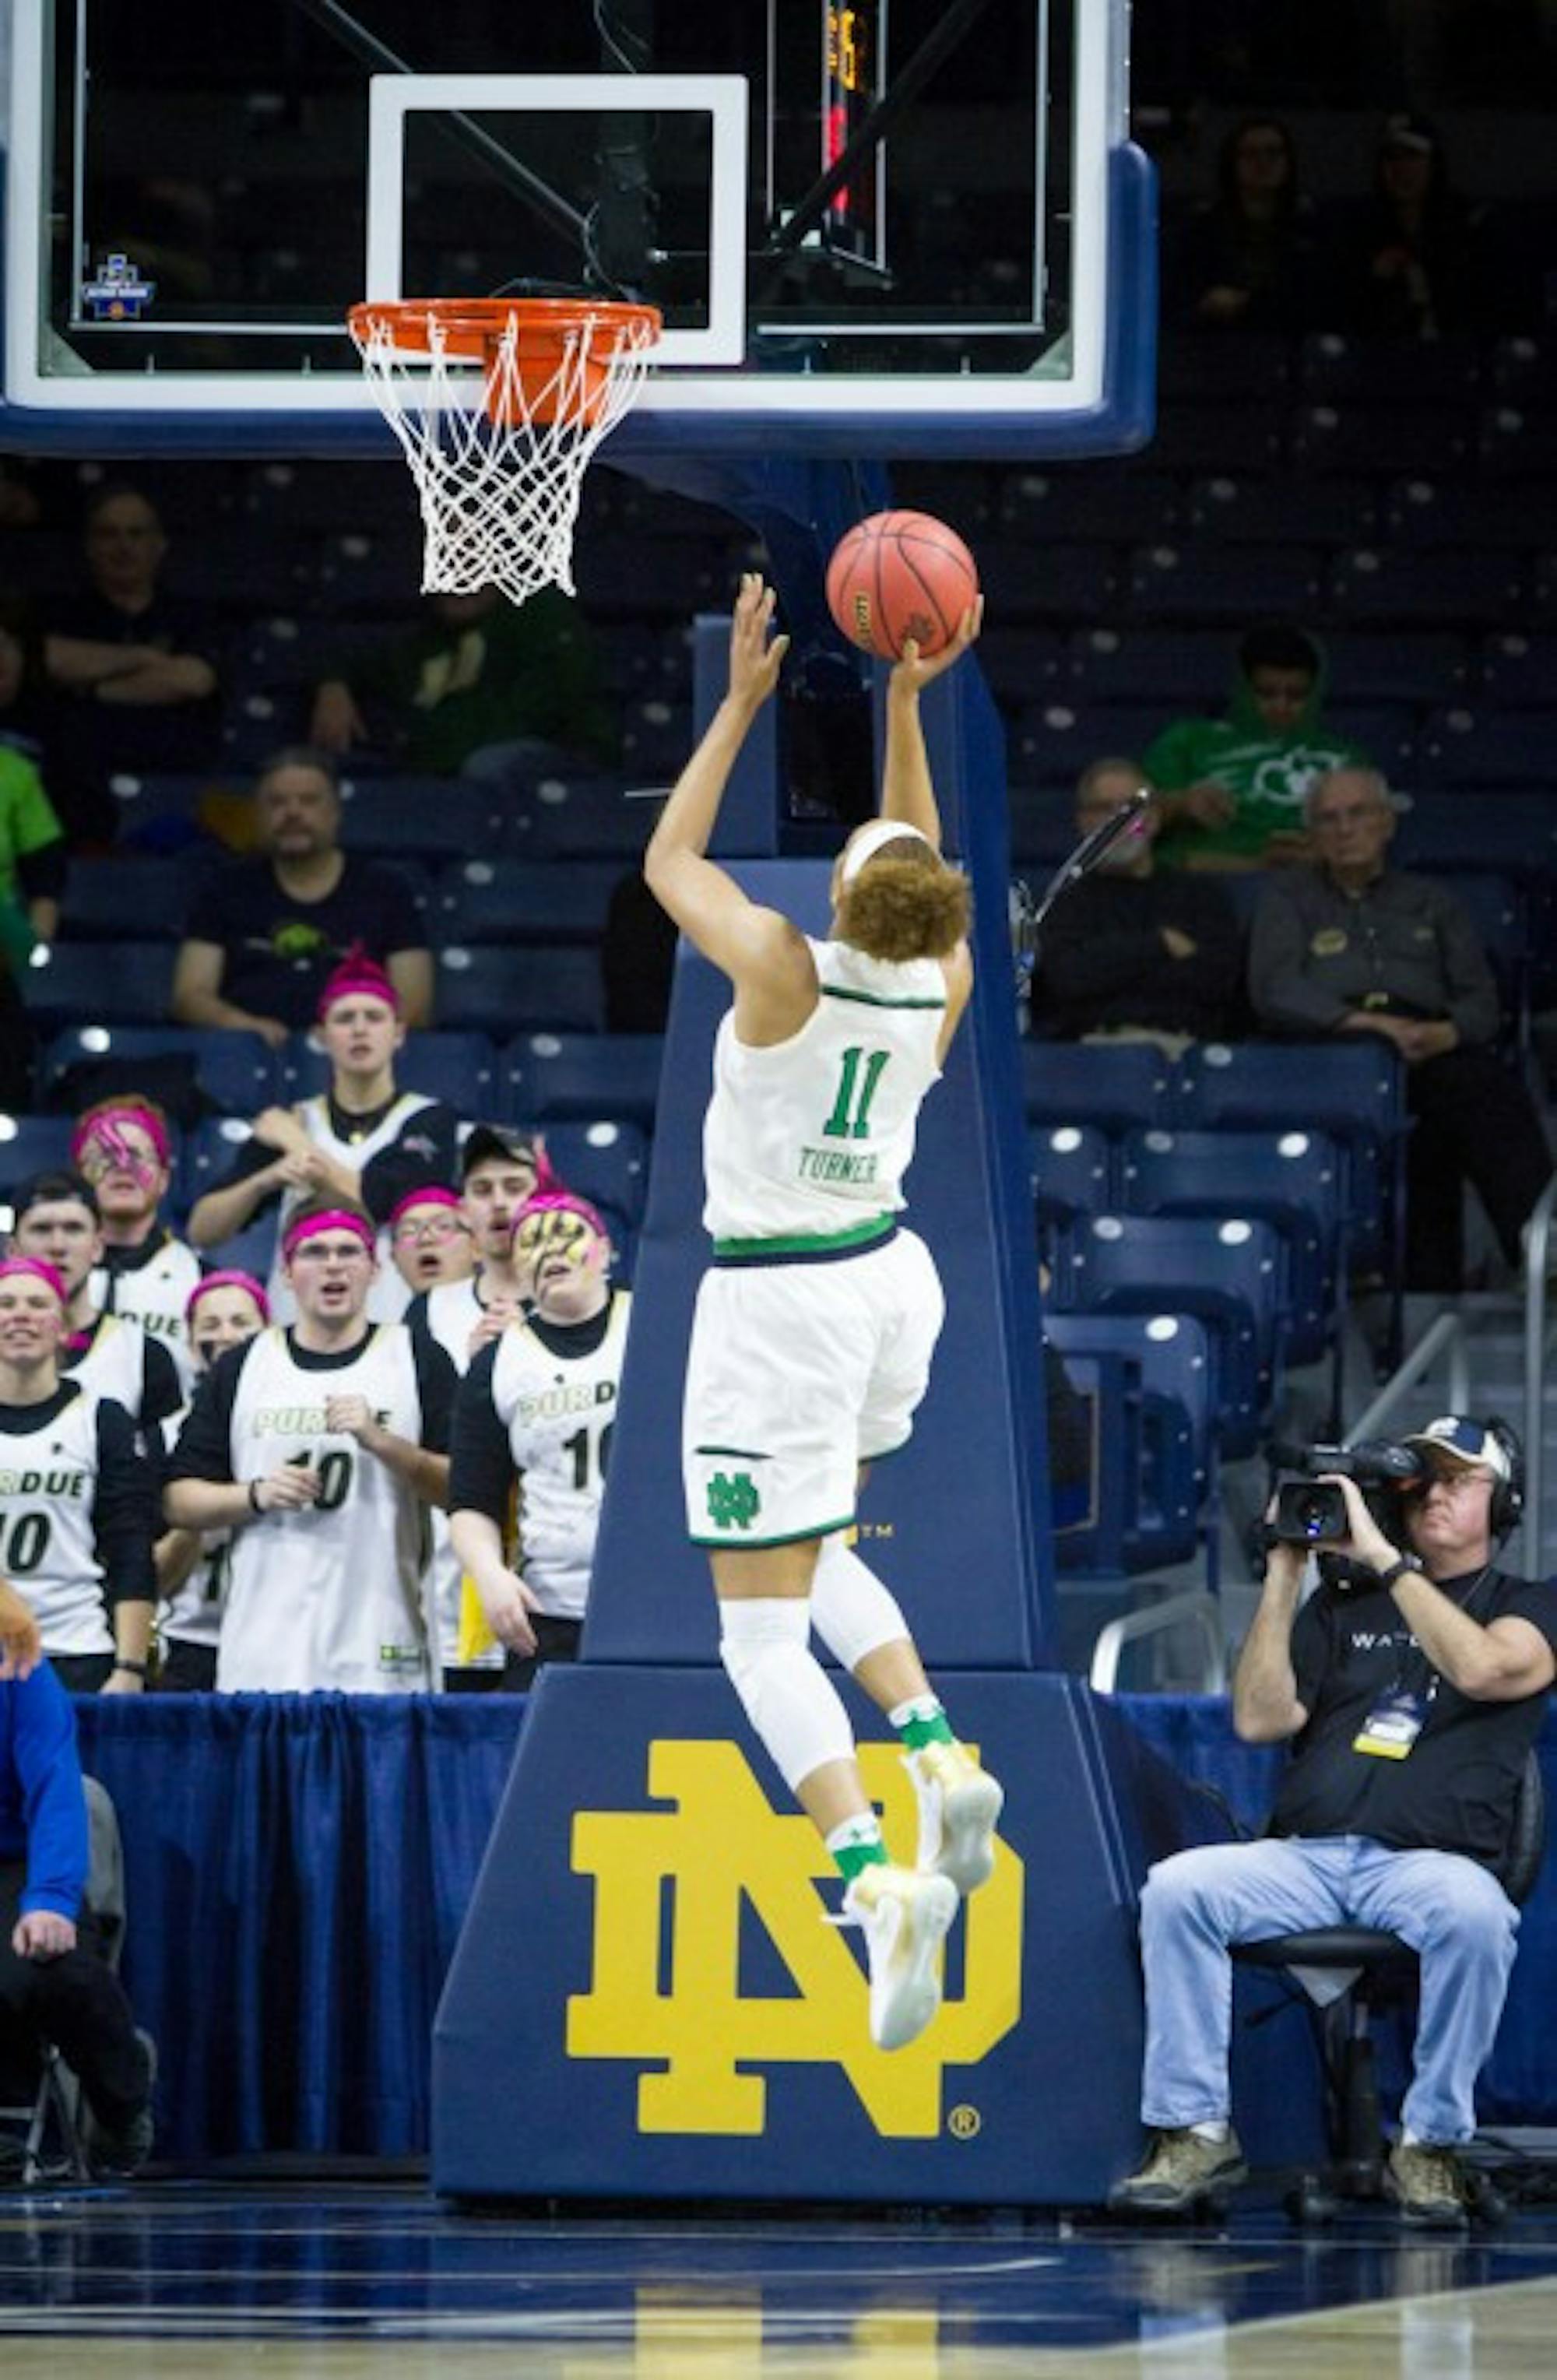 Irish junior forward Brianna Turner goes up for the layup during Notre Dame’s 88-82 win over Purdue on Sunday at Purcell Pavilion.